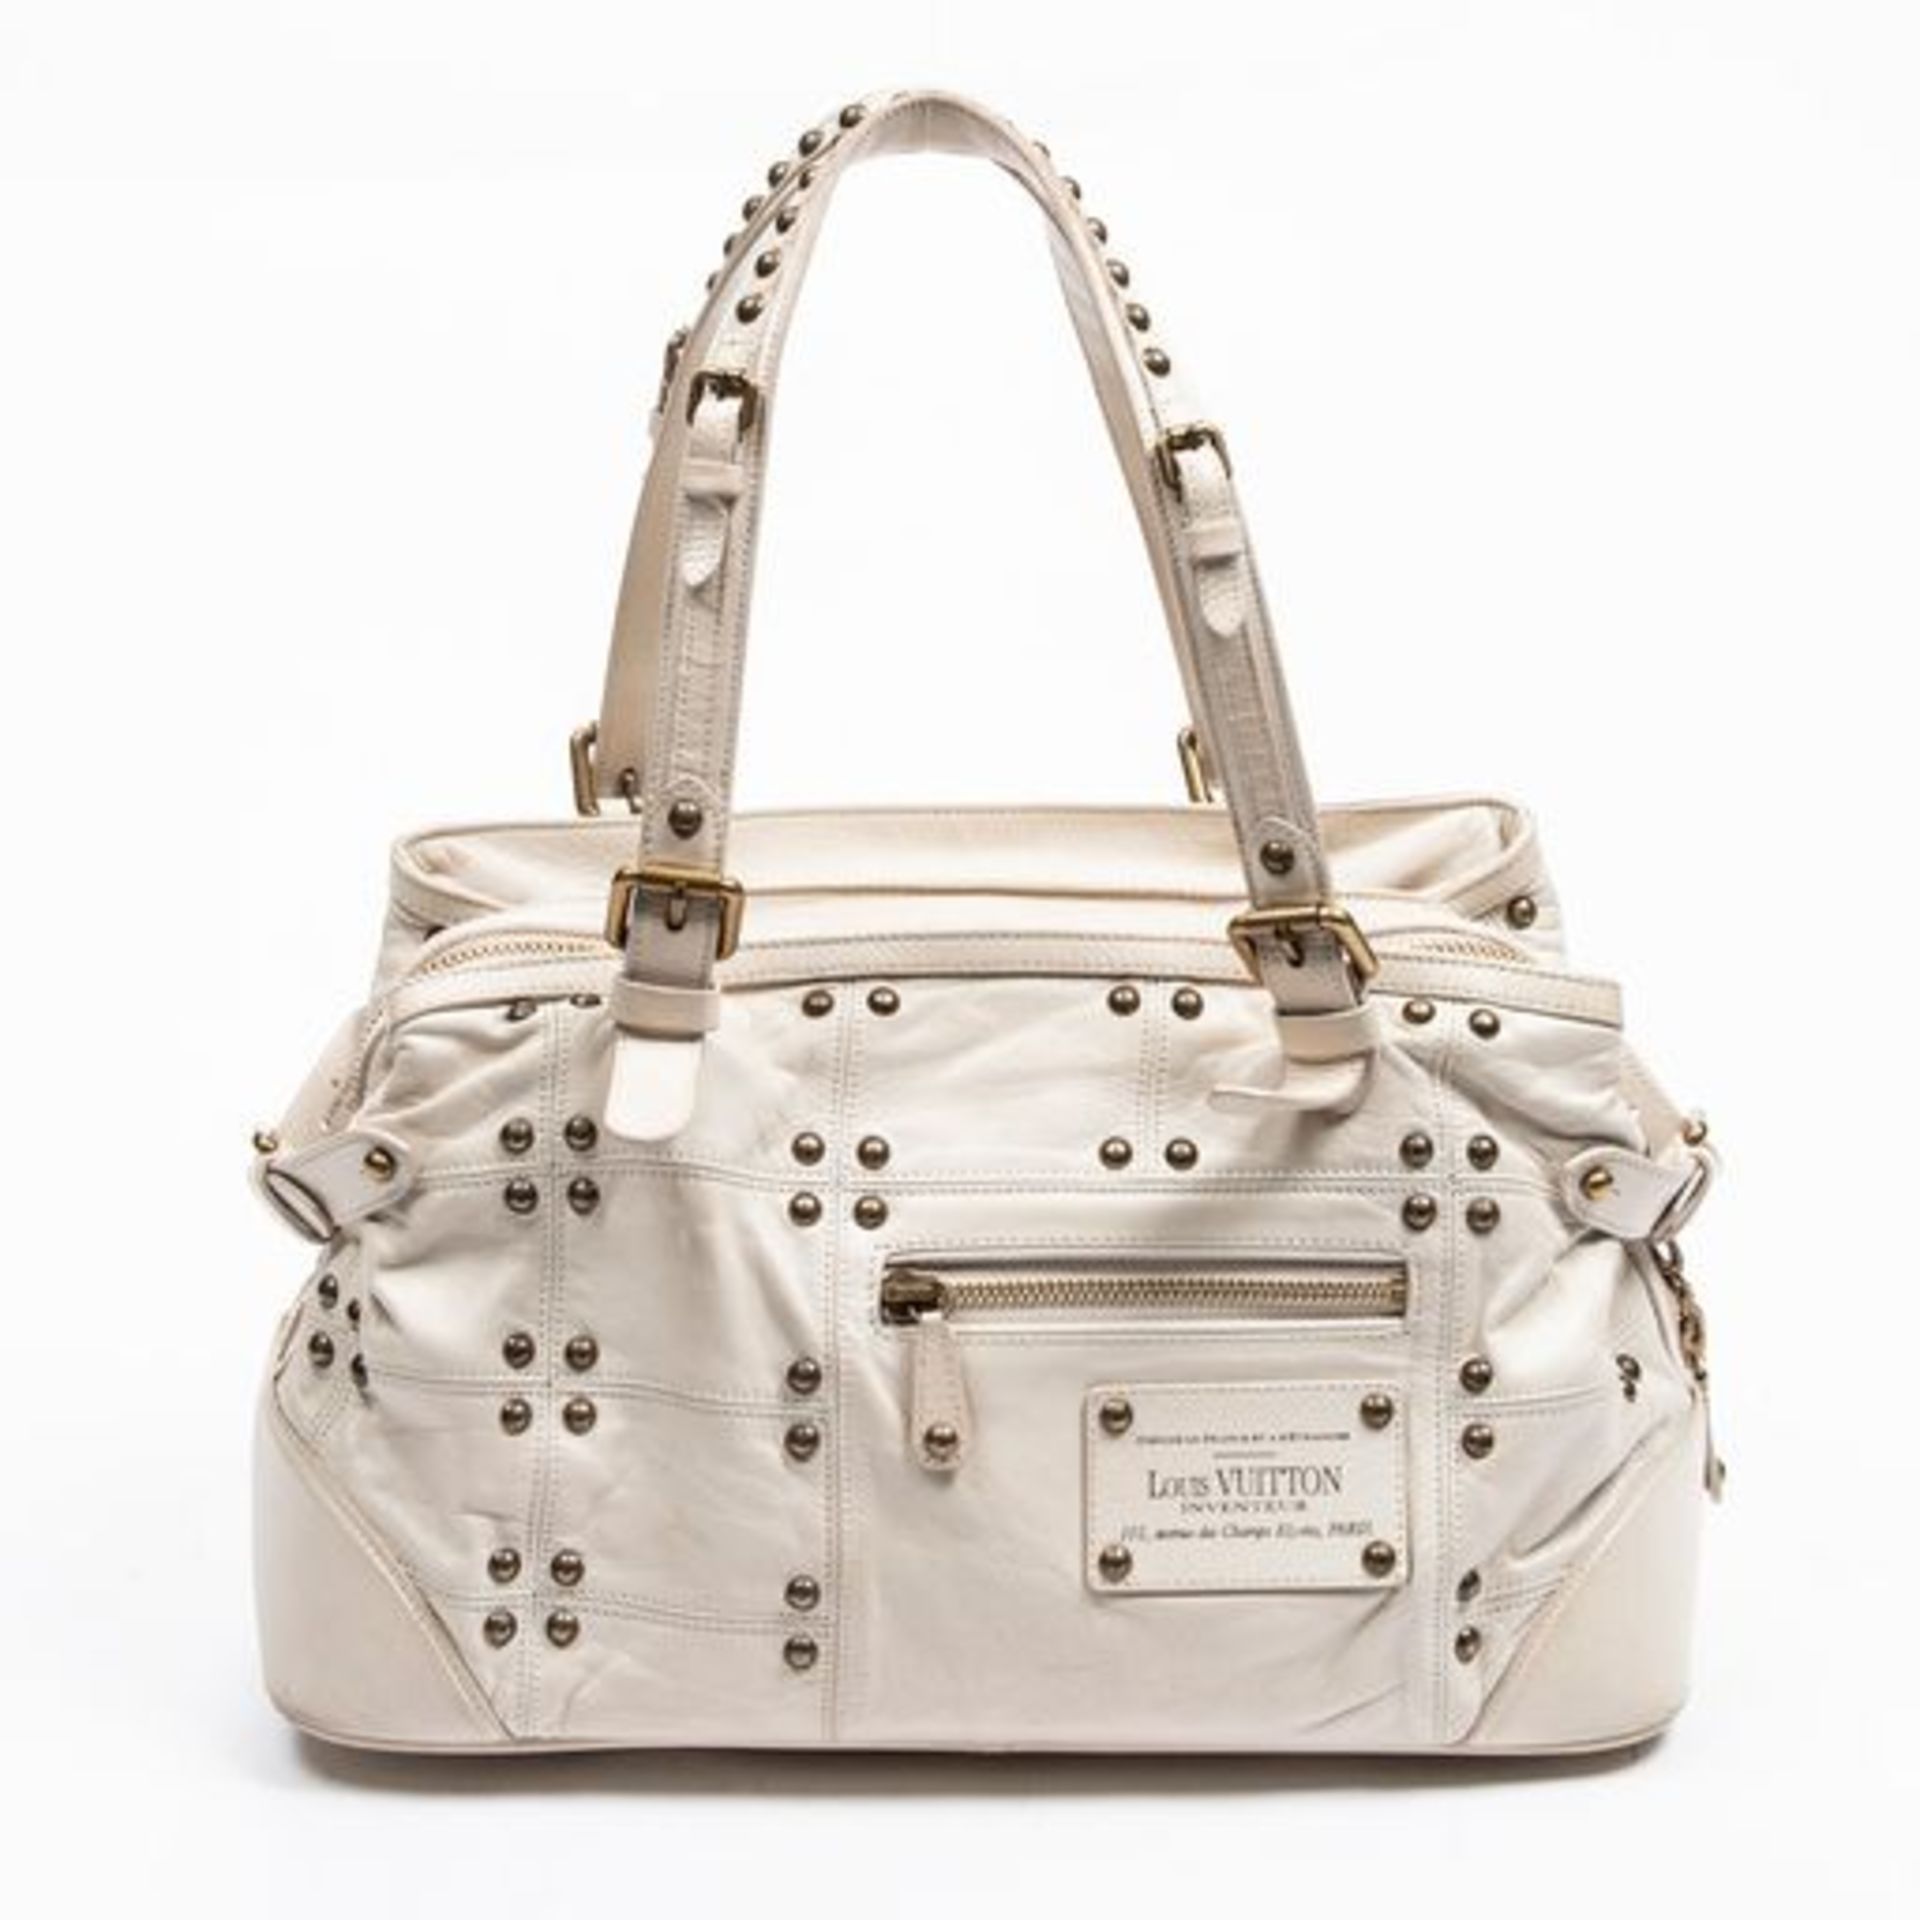 RRP £1,350.00 Lot To Contain 1 Louis Vuitton Calf Leather Riveting Shoulder Bag In Ivory - 33*20* - Image 3 of 3